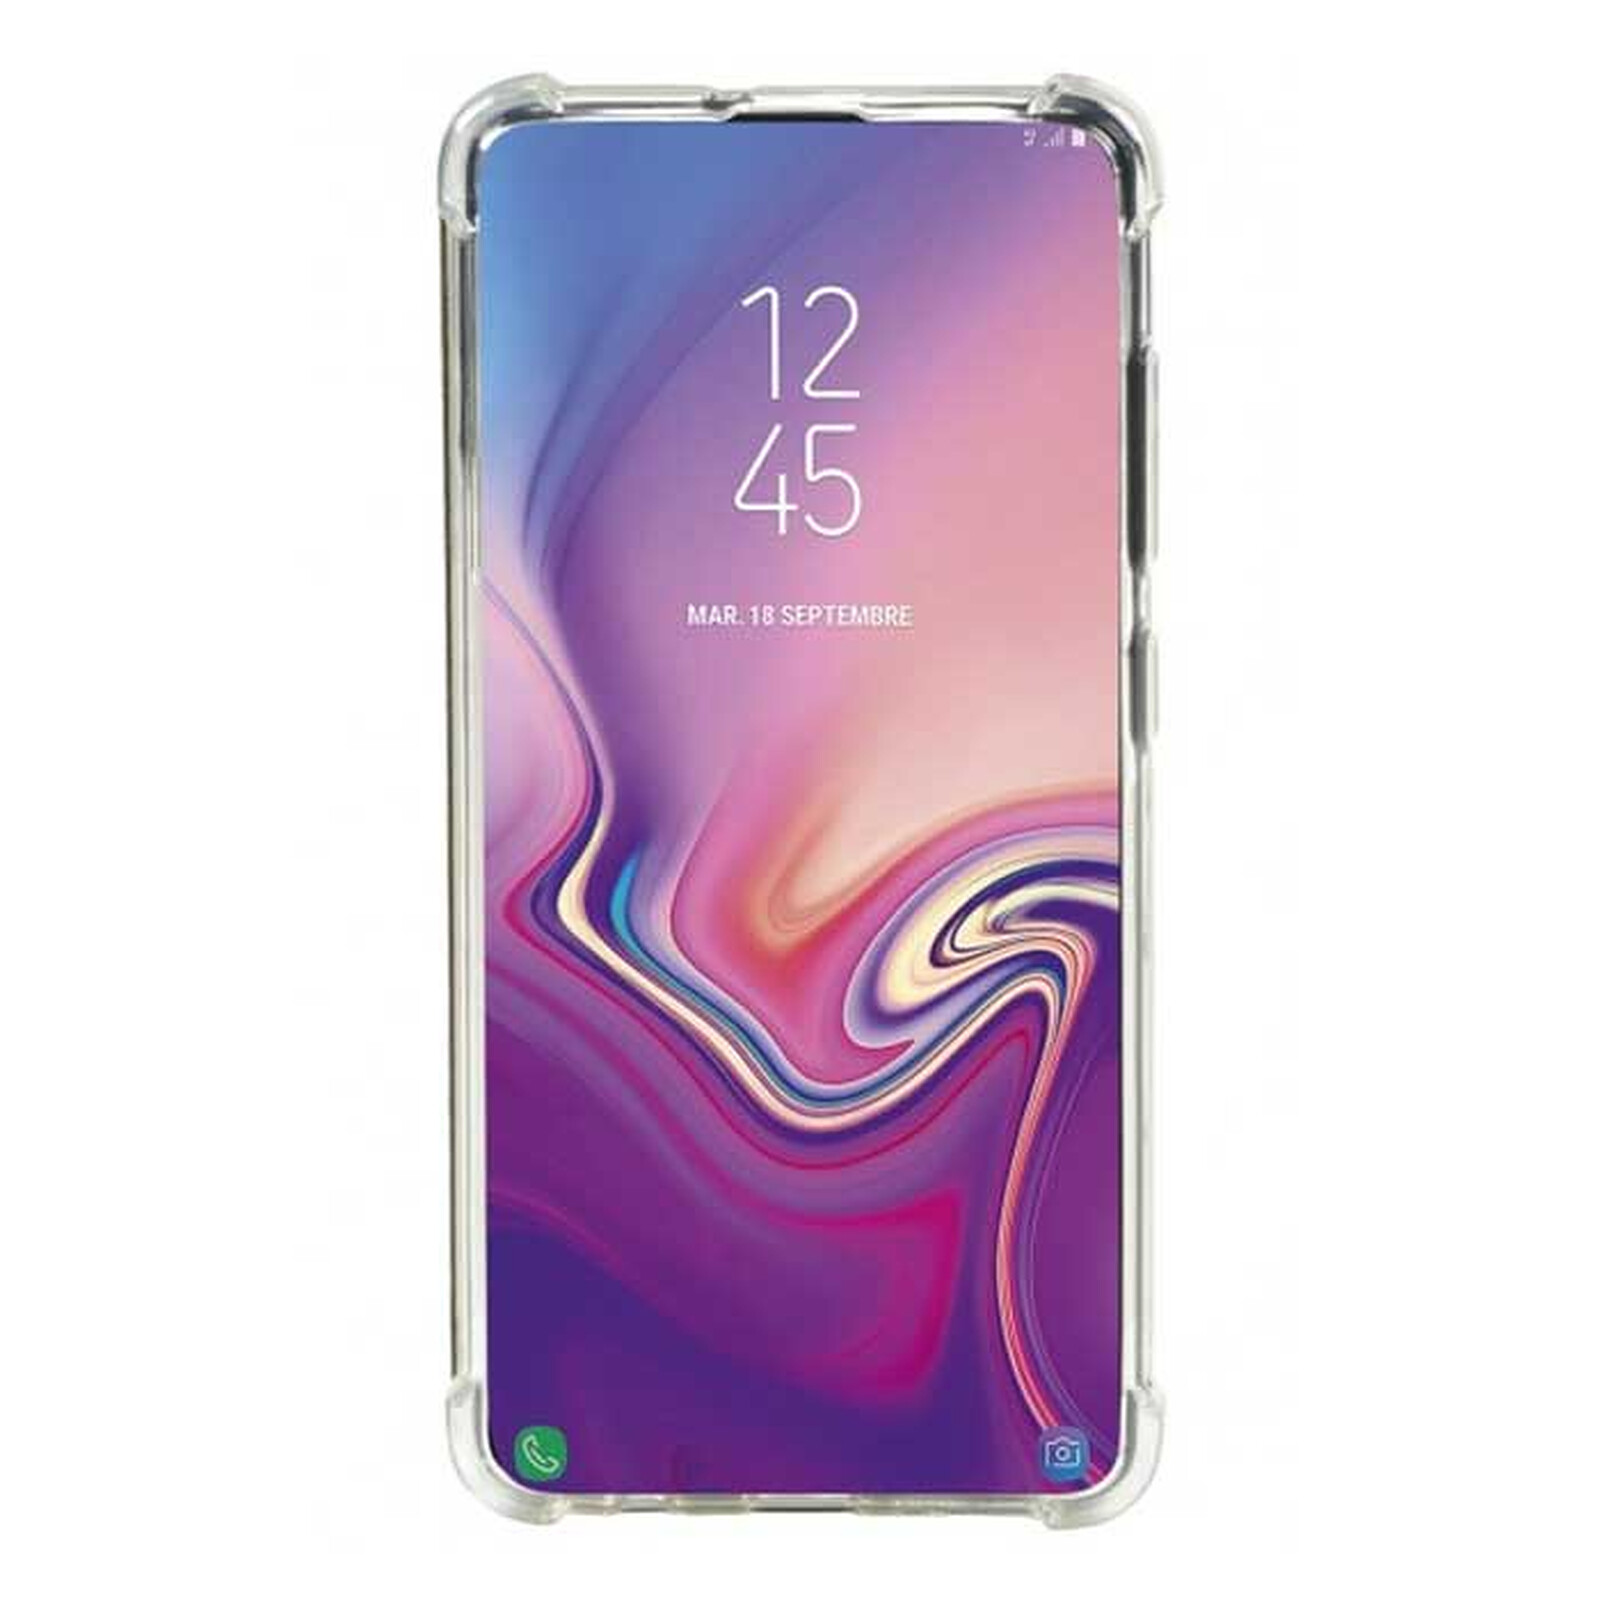 Mobilis Protective case with reinforced corners R series for Galaxy A51 - Phone  case - LDLC 3-year warranty